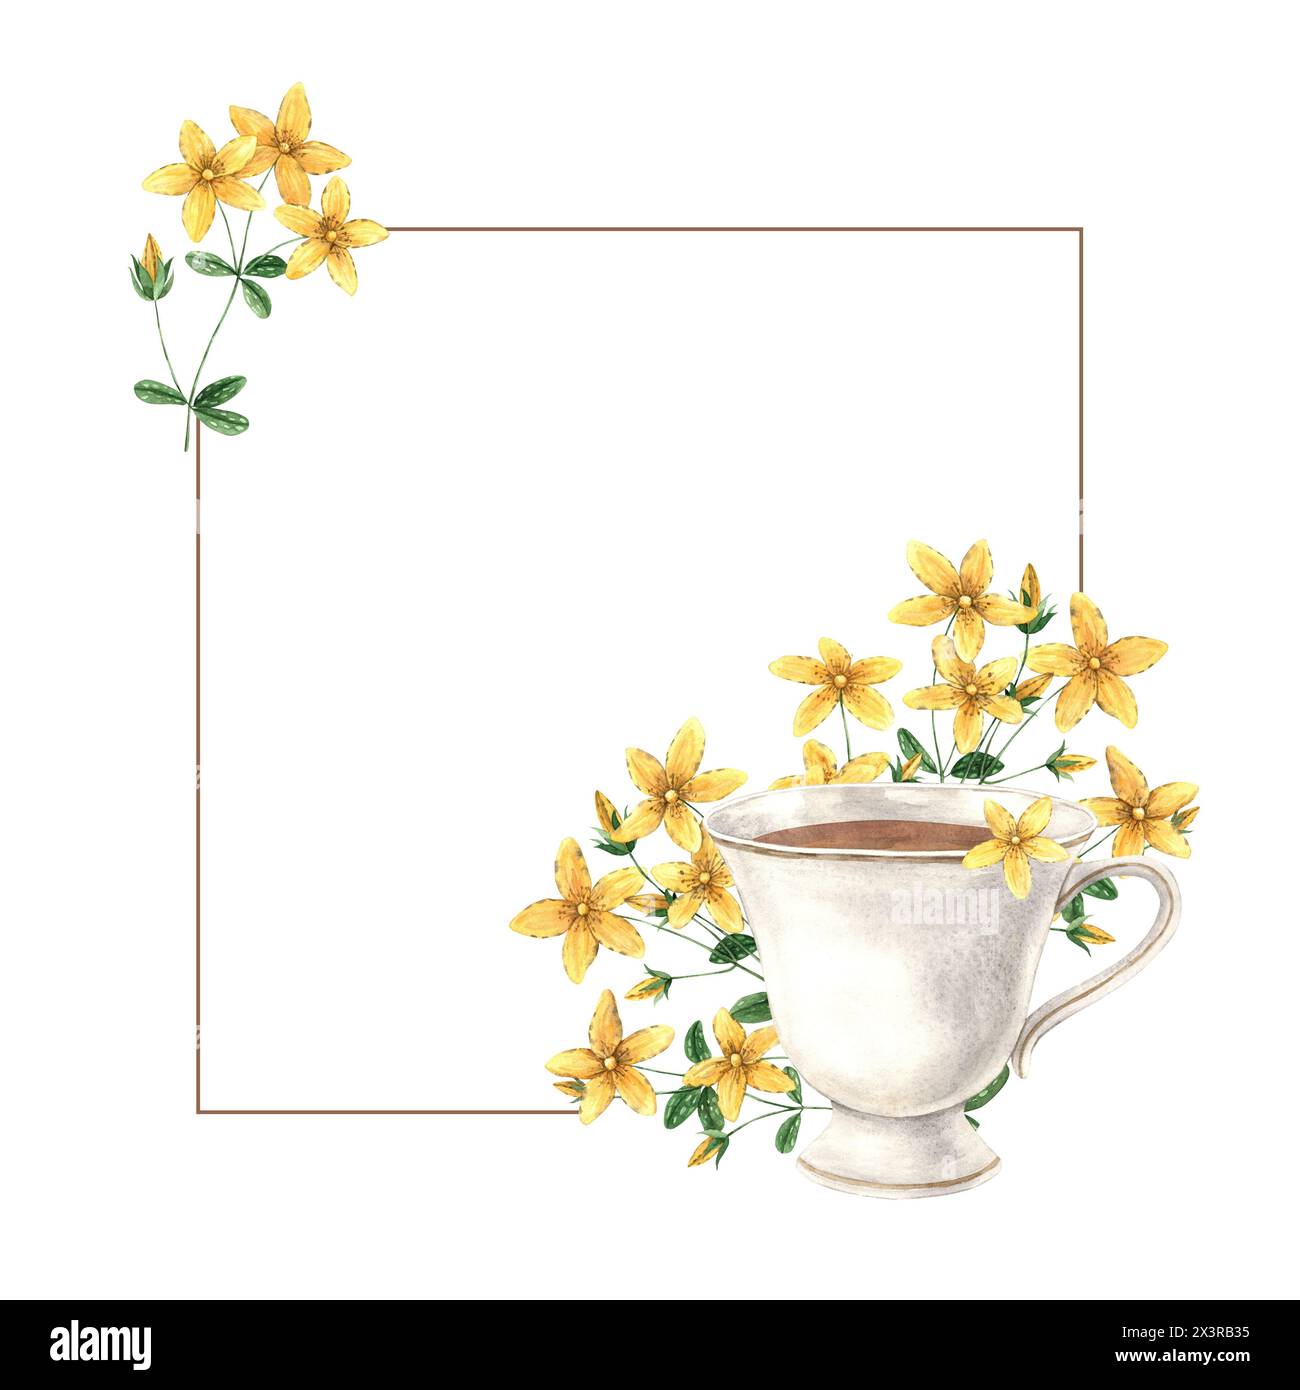 Watercolor frame with vintage mug and St. John's wort flowers. The illustration is hand drawn on an isolated background. Drawing for menu design, pack Stock Photo